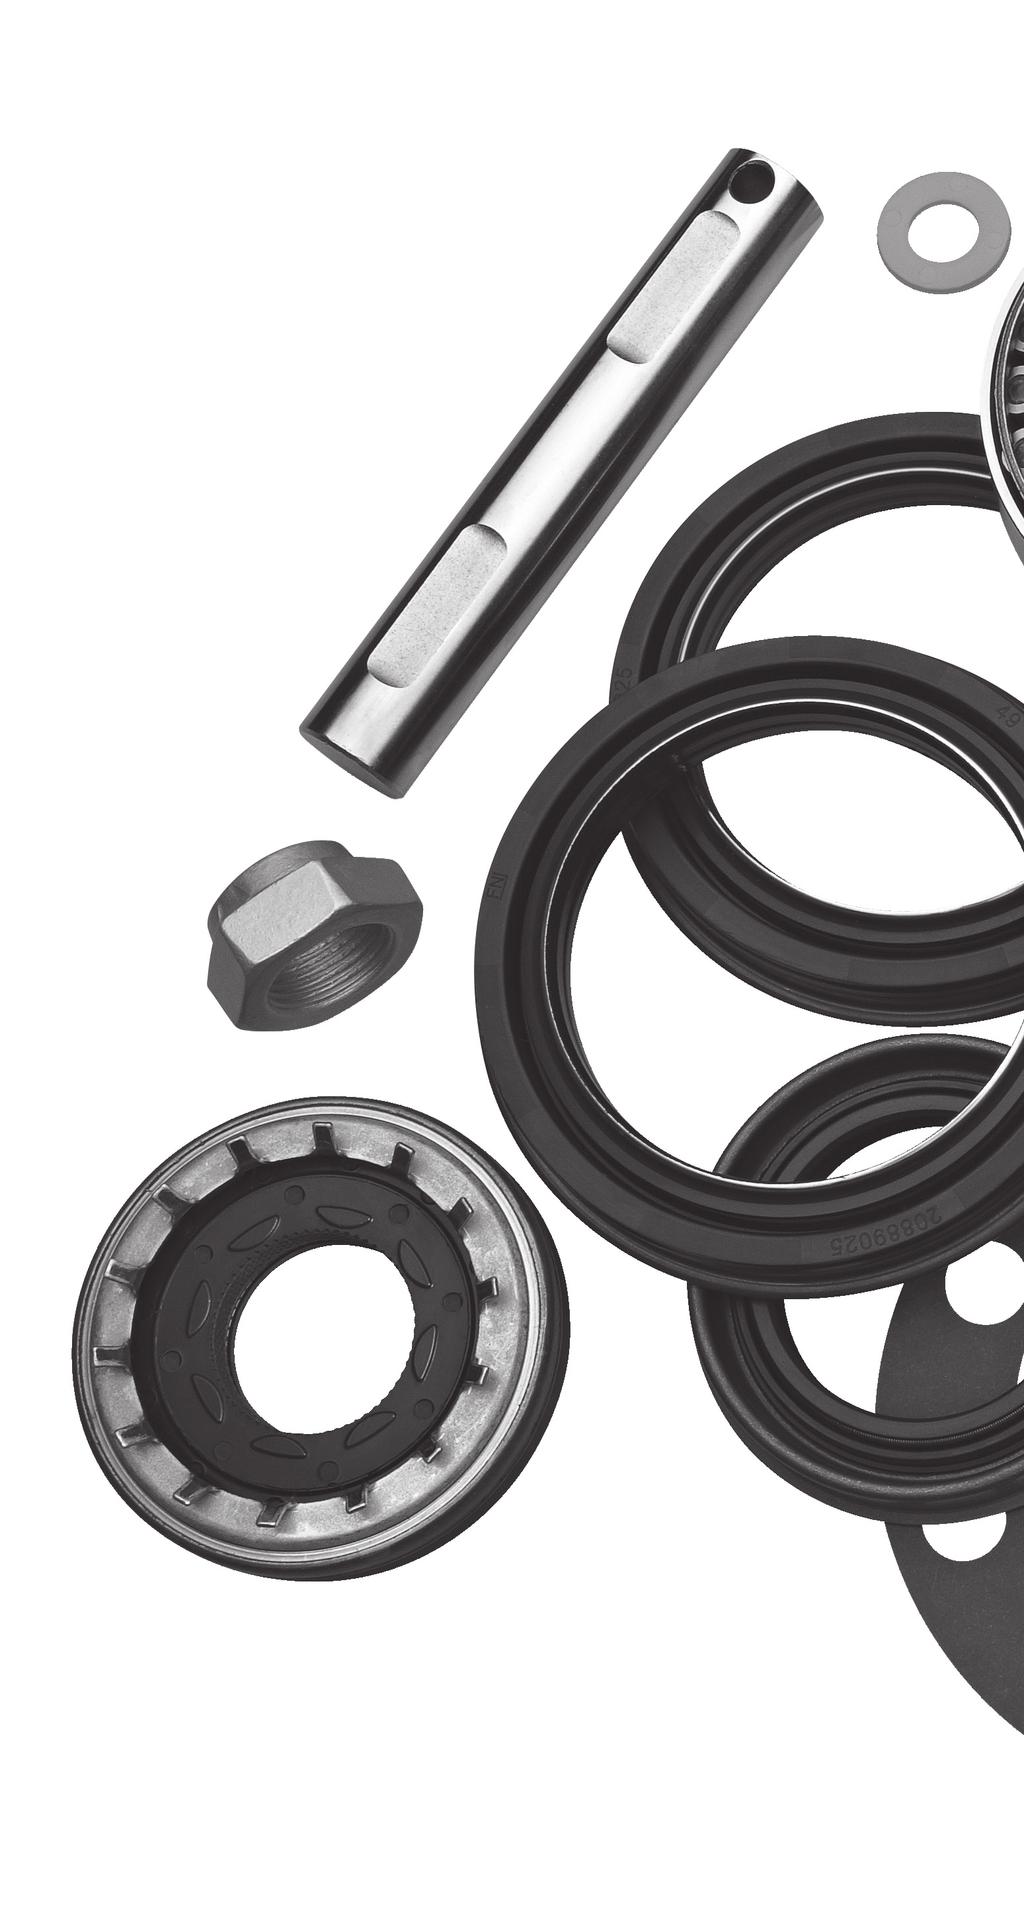 Axle Components Driveshaft Components Repair Kits Only original equipment quality components are guaranteed to meet the same specifications as the parts they